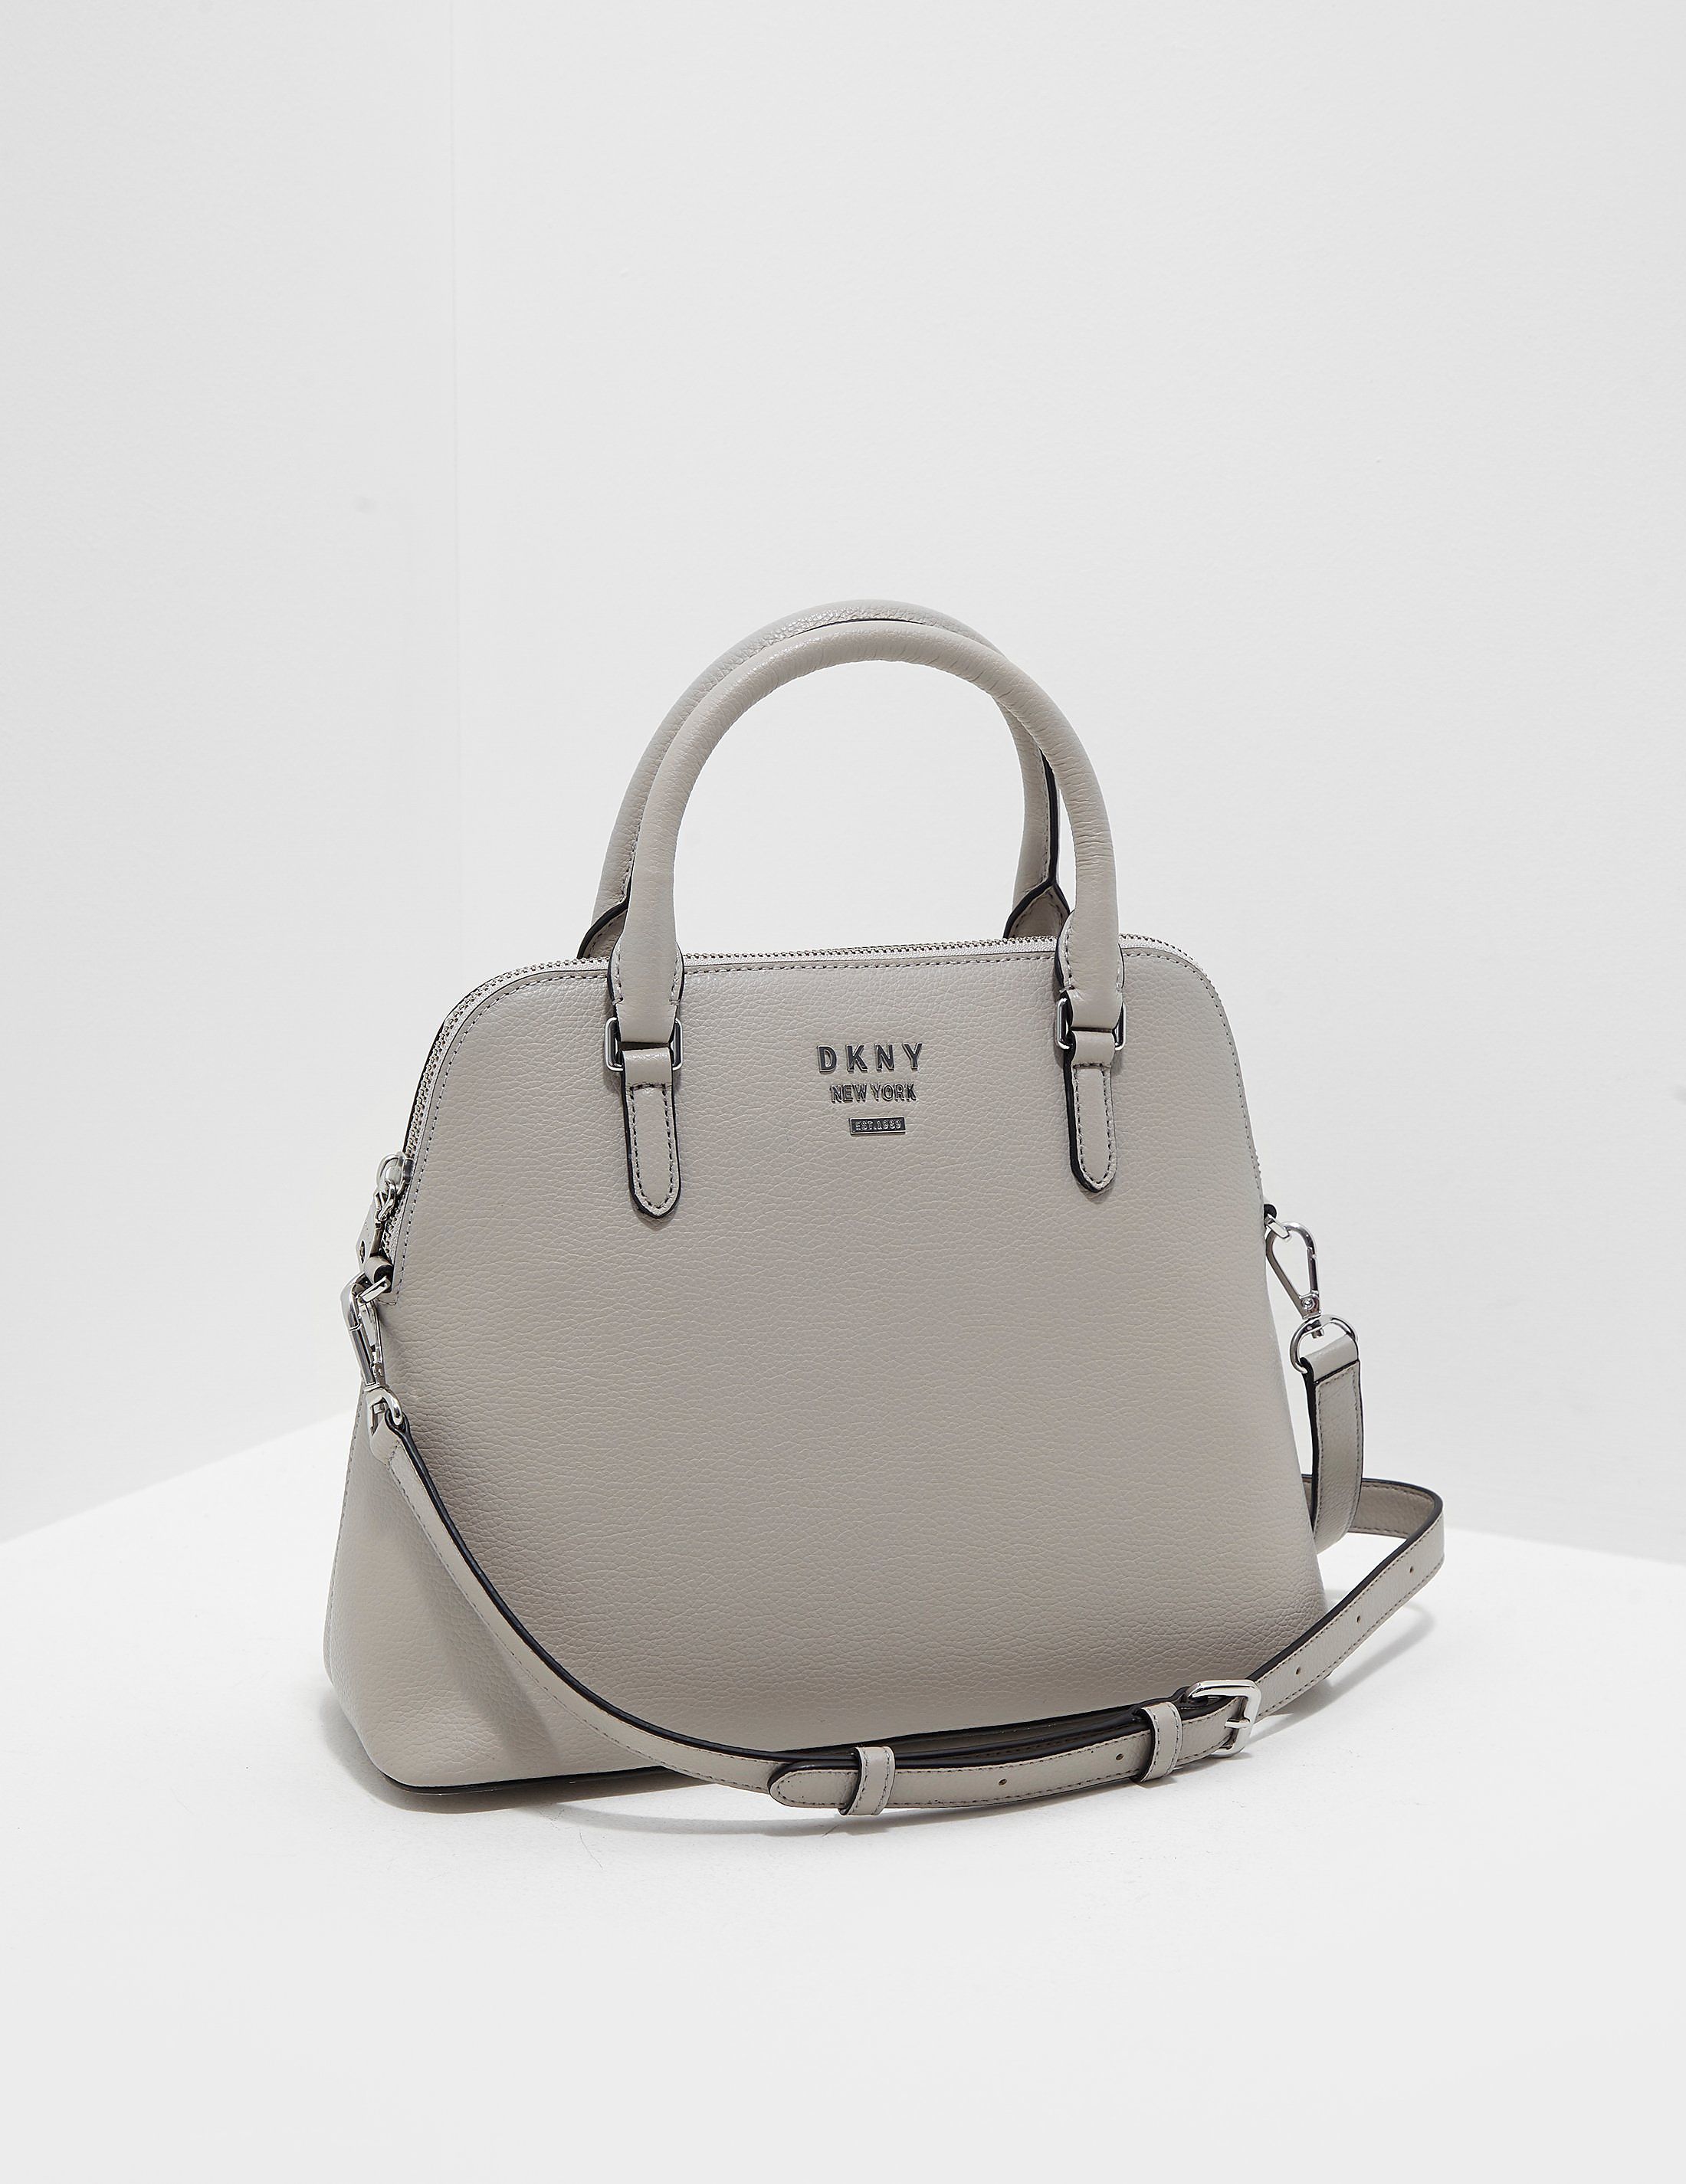 Dkny Bags Outlet Canada